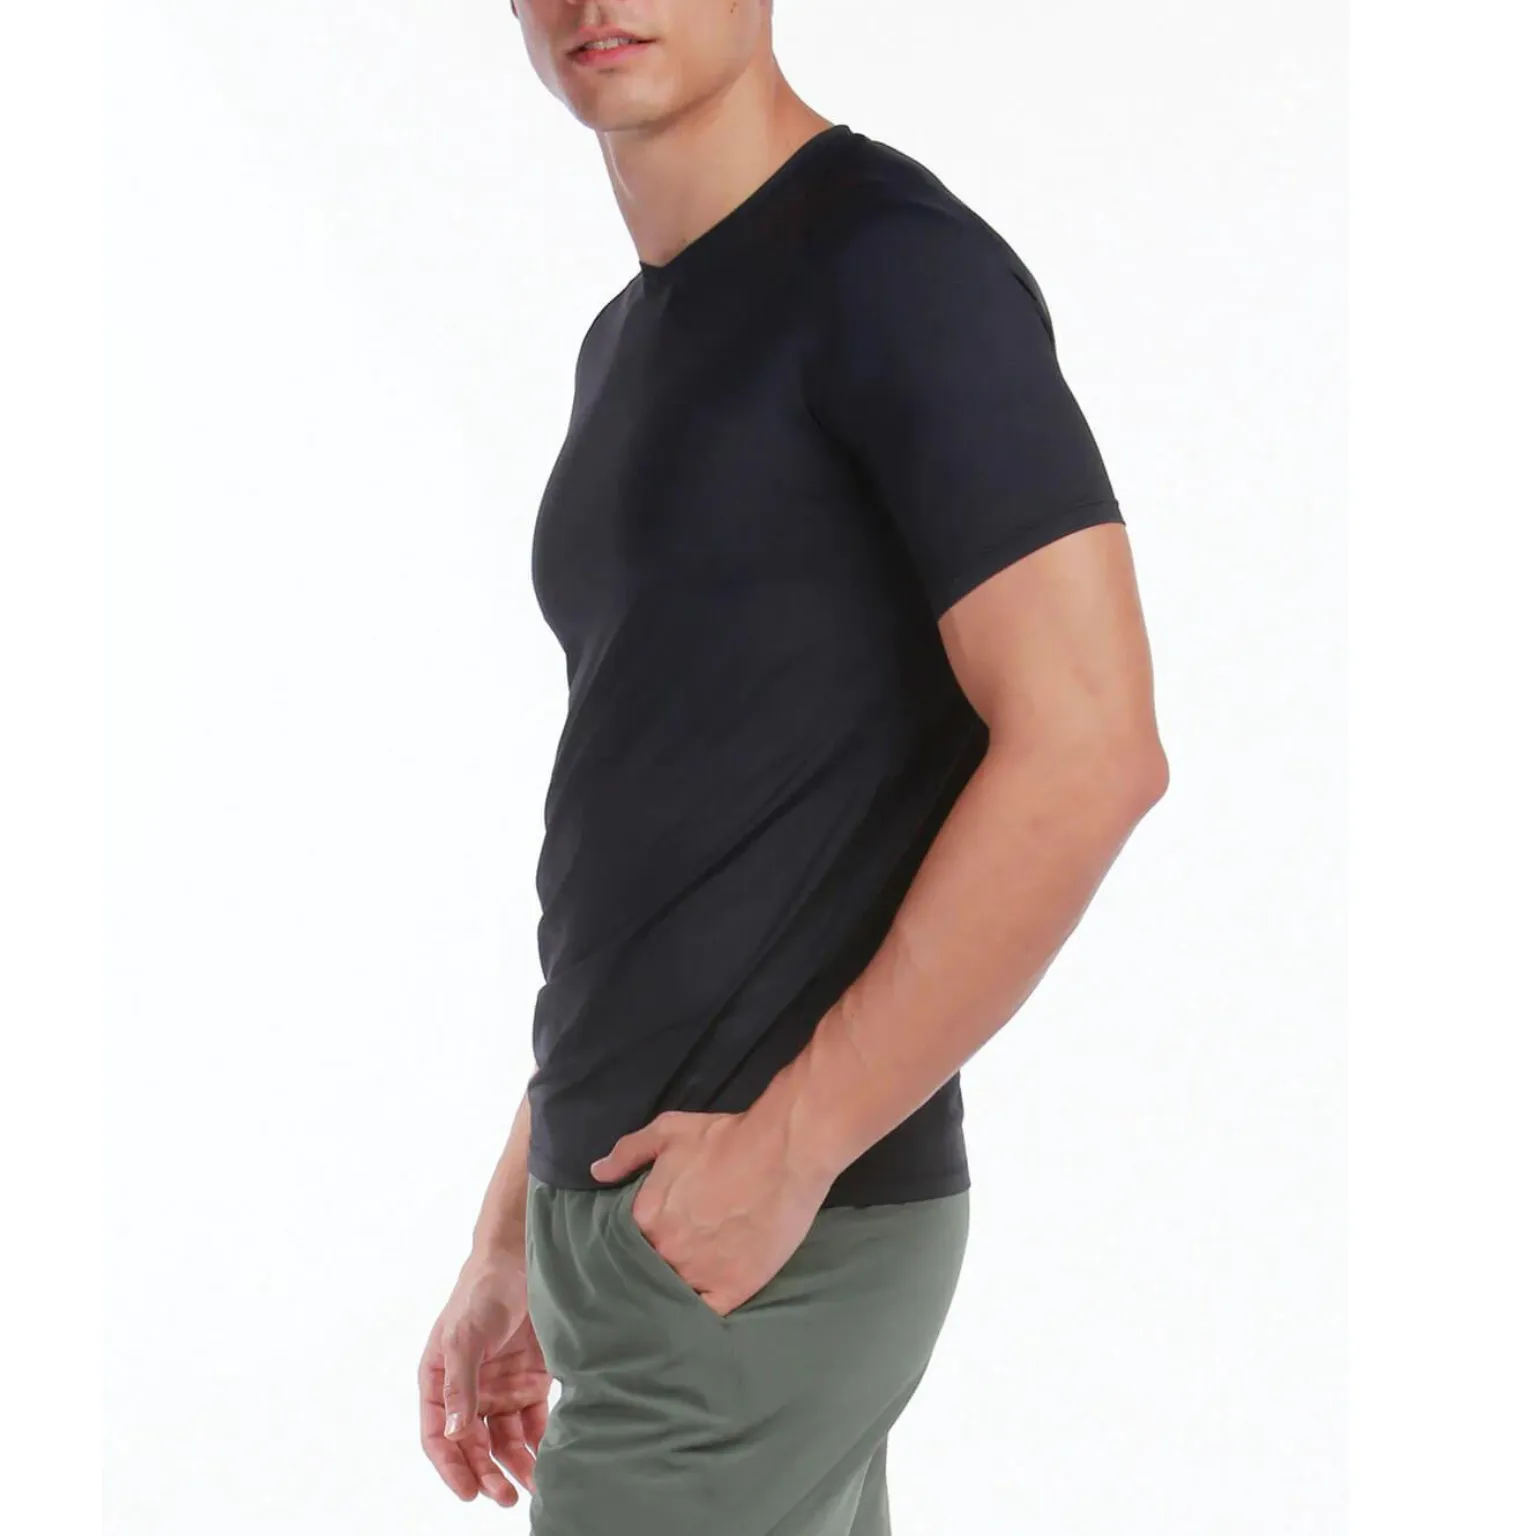 Slim Fit T-shirt Manufacturing with superior quality